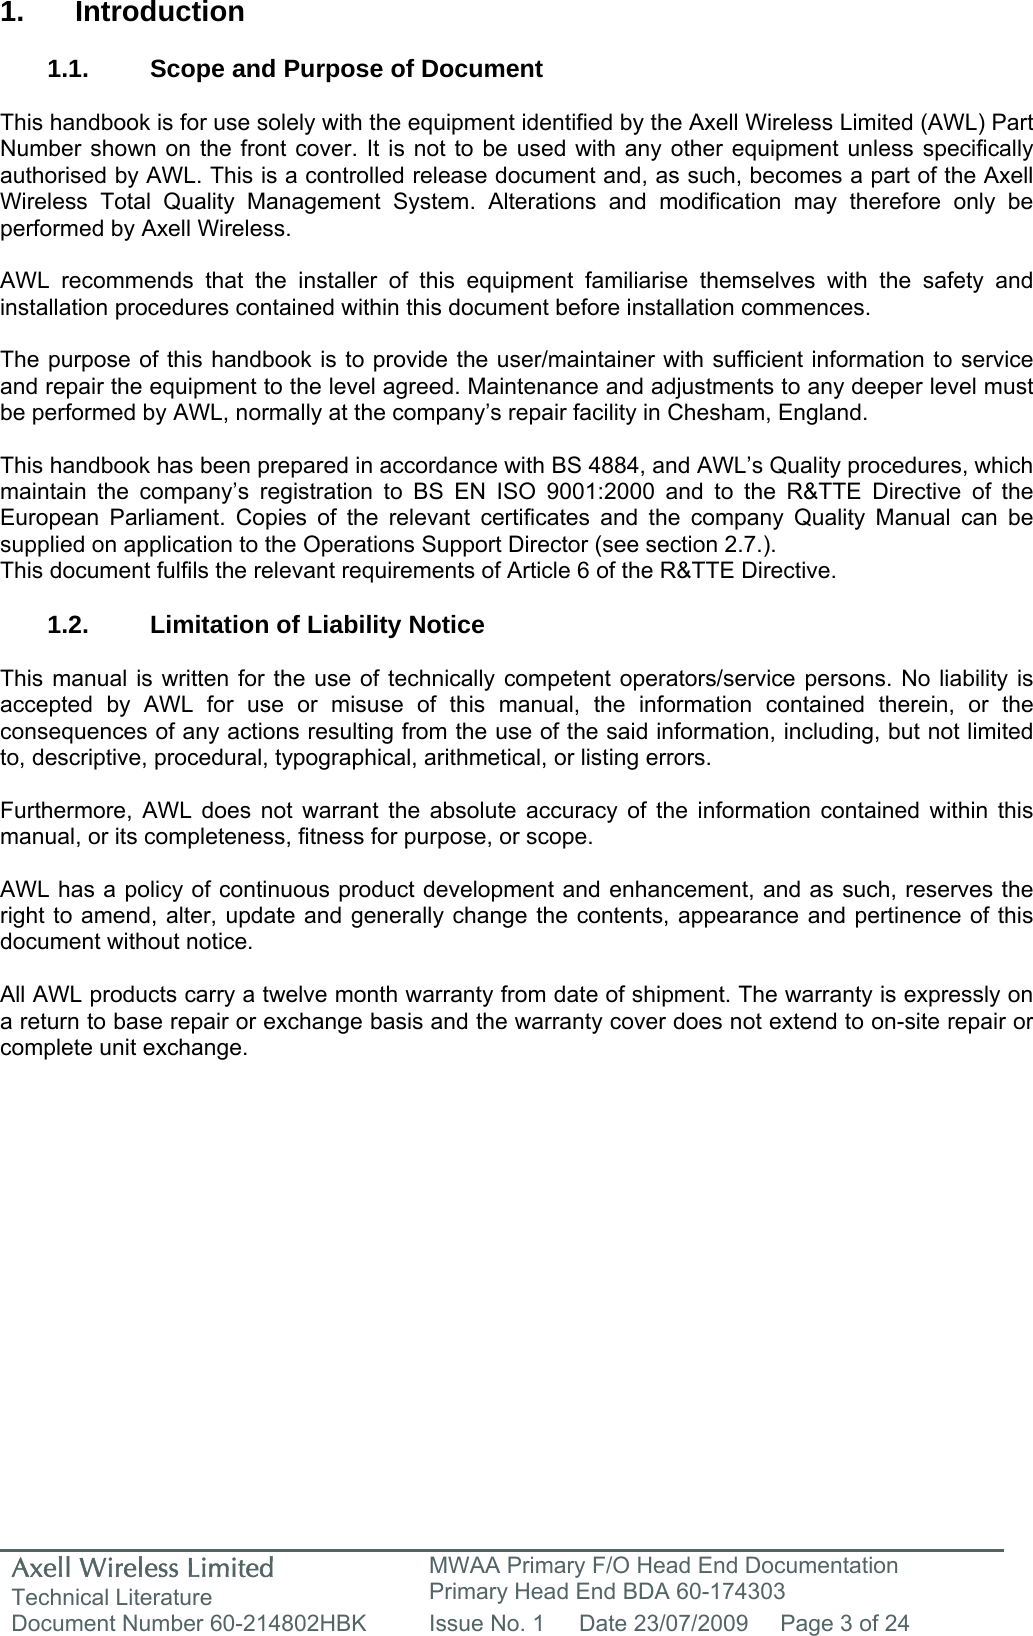 Axell Wireless Limited Technical Literature MWAA Primary F/O Head End Documentation Primary Head End BDA 60-174303 Document Number 60-214802HBK  Issue No. 1  Date 23/07/2009  Page 3 of 24   1. Introduction  1.1.  Scope and Purpose of Document  This handbook is for use solely with the equipment identified by the Axell Wireless Limited (AWL) Part Number shown on the front cover. It is not to be used with any other equipment unless specifically authorised by AWL. This is a controlled release document and, as such, becomes a part of the Axell Wireless Total Quality Management System. Alterations and modification may therefore only be performed by Axell Wireless.  AWL recommends that the installer of this equipment familiarise themselves with the safety and installation procedures contained within this document before installation commences.  The purpose of this handbook is to provide the user/maintainer with sufficient information to service and repair the equipment to the level agreed. Maintenance and adjustments to any deeper level must be performed by AWL, normally at the company’s repair facility in Chesham, England.  This handbook has been prepared in accordance with BS 4884, and AWL’s Quality procedures, which maintain the company’s registration to BS EN ISO 9001:2000 and to the R&amp;TTE Directive of the European Parliament. Copies of the relevant certificates and the company Quality Manual can be supplied on application to the Operations Support Director (see section 2.7.). This document fulfils the relevant requirements of Article 6 of the R&amp;TTE Directive.  1.2. Limitation of Liability Notice  This manual is written for the use of technically competent operators/service persons. No liability is accepted by AWL for use or misuse of this manual, the information contained therein, or the consequences of any actions resulting from the use of the said information, including, but not limited to, descriptive, procedural, typographical, arithmetical, or listing errors.  Furthermore, AWL does not warrant the absolute accuracy of the information contained within this manual, or its completeness, fitness for purpose, or scope.  AWL has a policy of continuous product development and enhancement, and as such, reserves the right to amend, alter, update and generally change the contents, appearance and pertinence of this document without notice.  All AWL products carry a twelve month warranty from date of shipment. The warranty is expressly on a return to base repair or exchange basis and the warranty cover does not extend to on-site repair or complete unit exchange.  